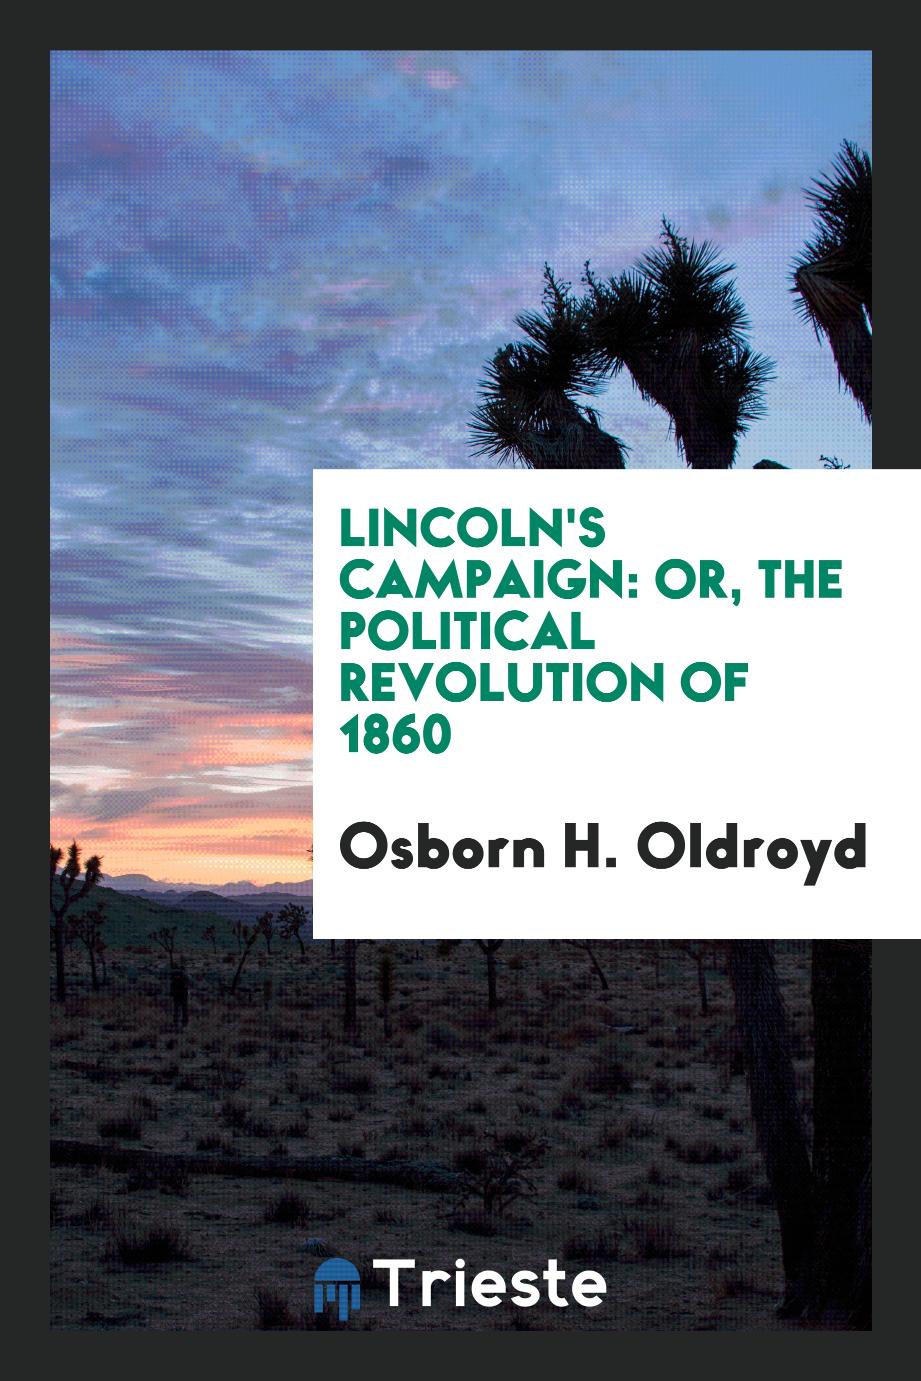 Lincoln's Campaign: Or, The Political Revolution of 1860